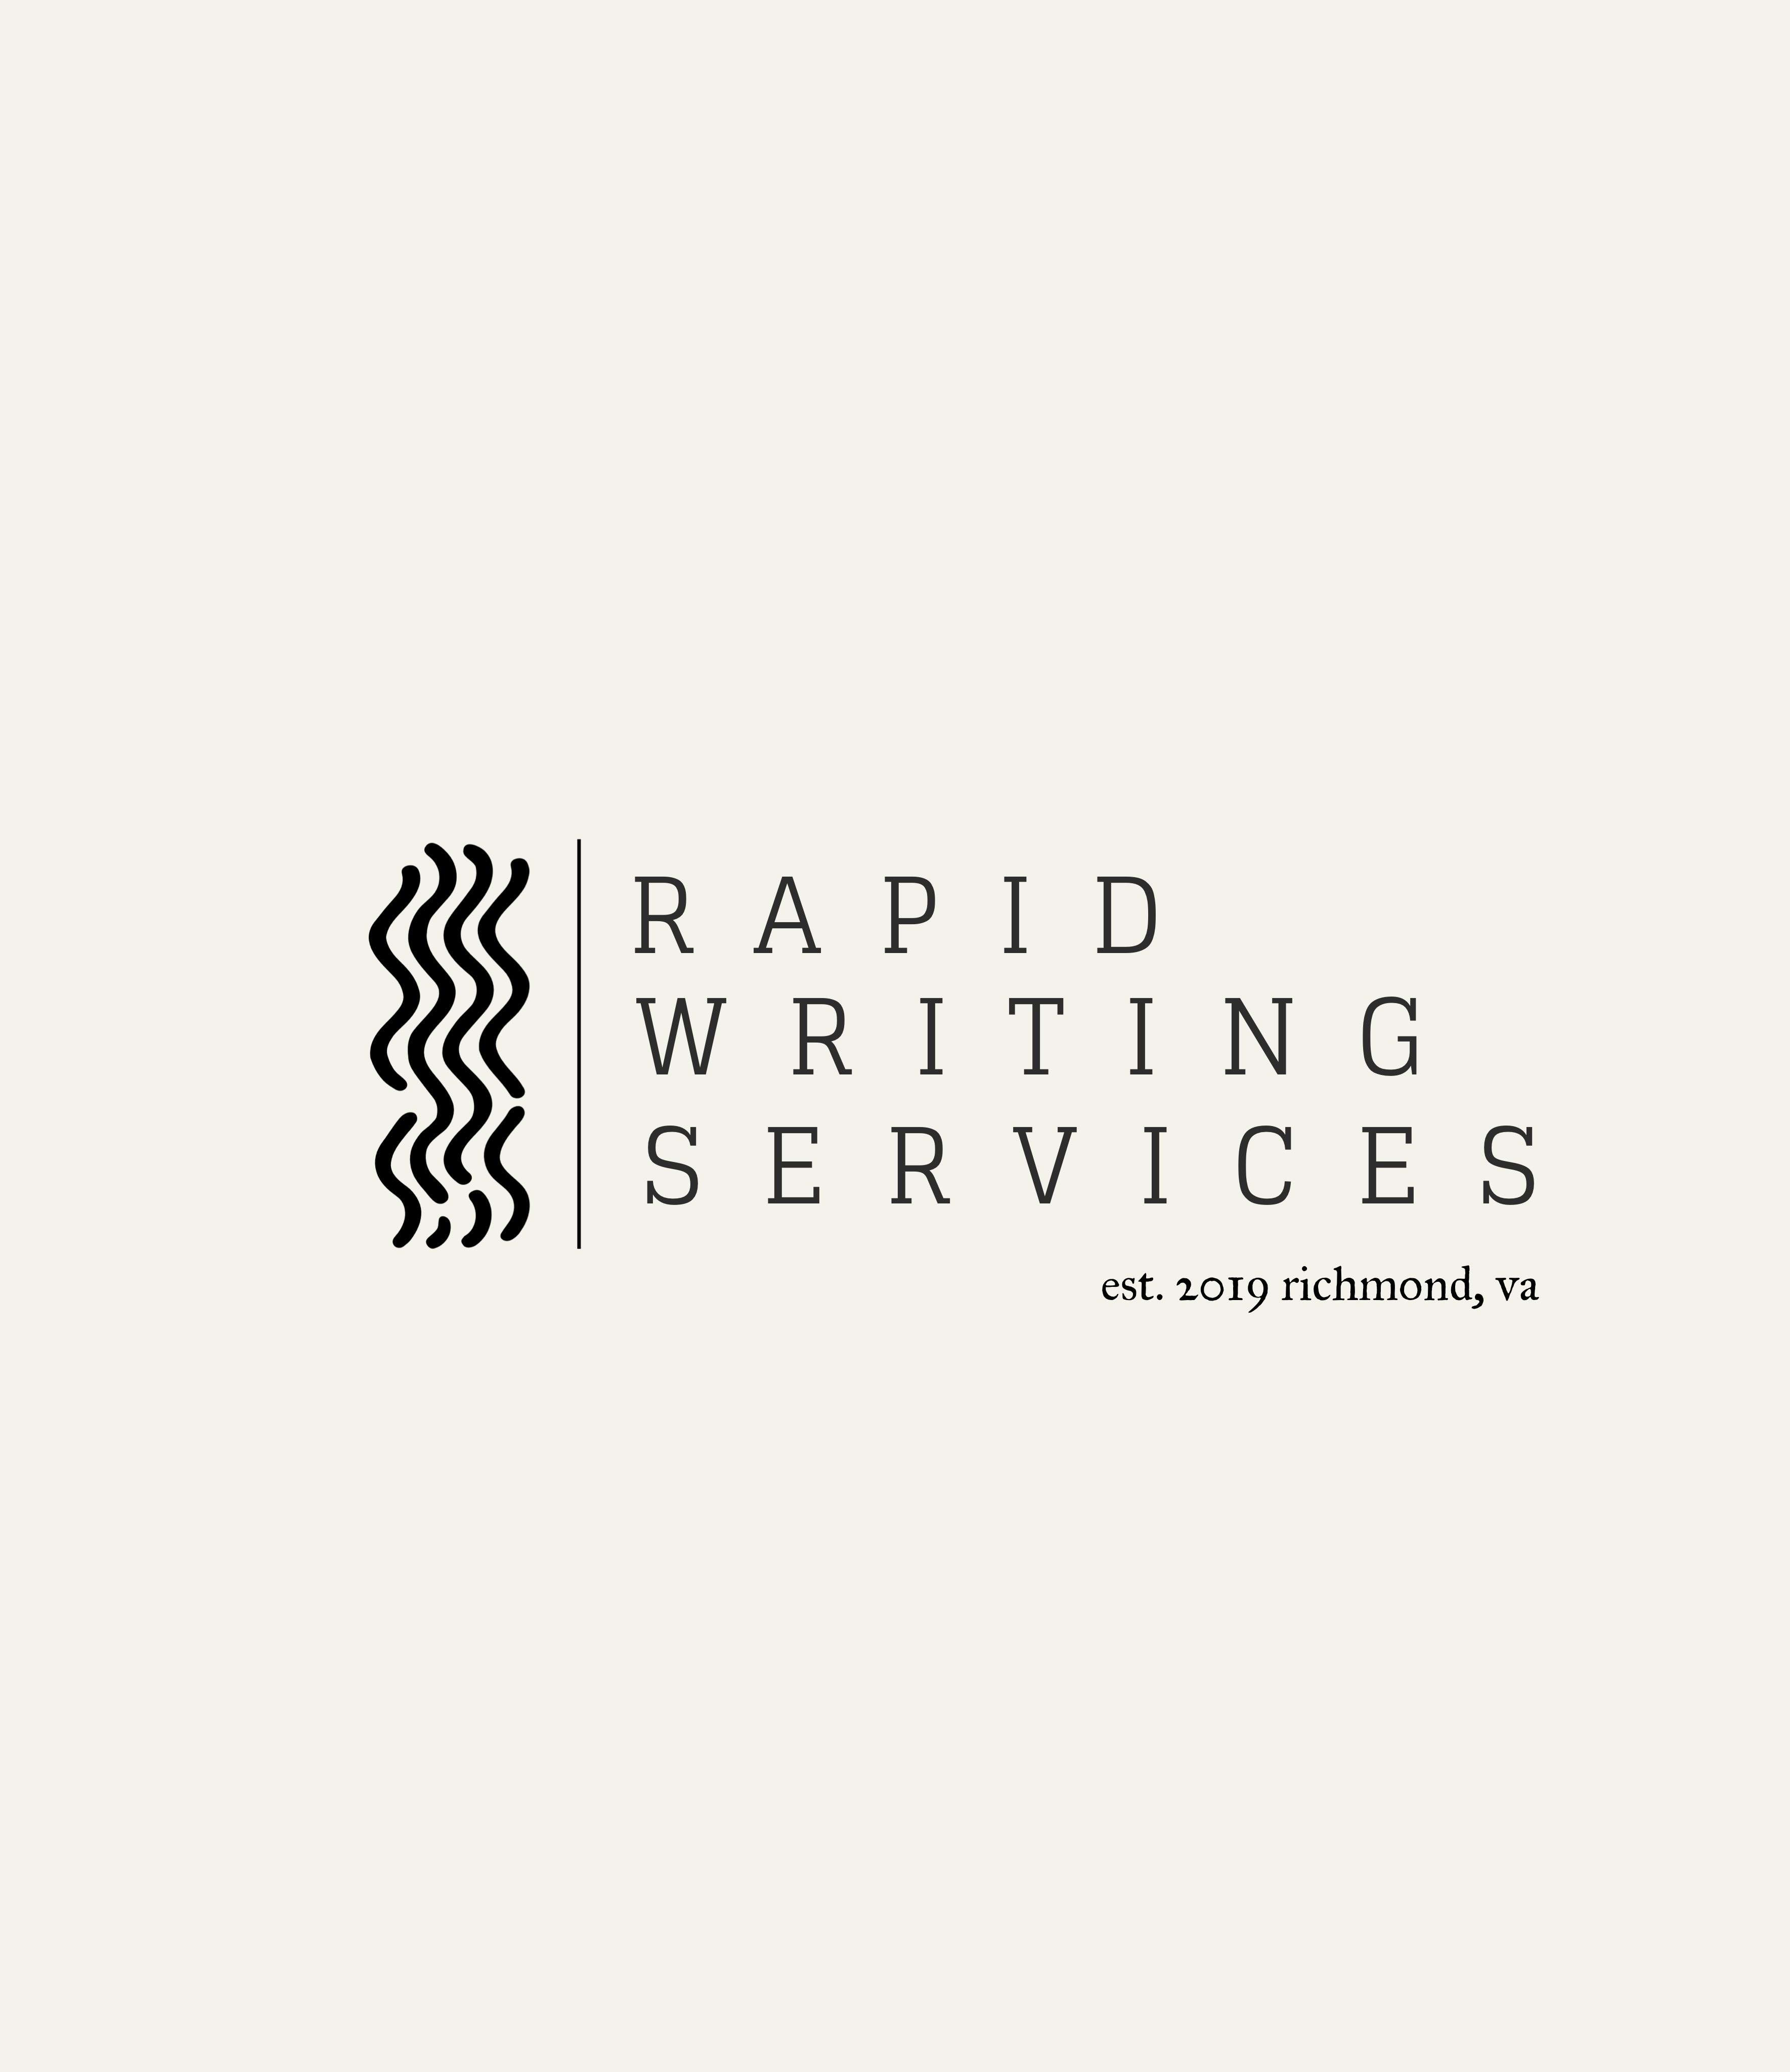 Rapid Writing Services